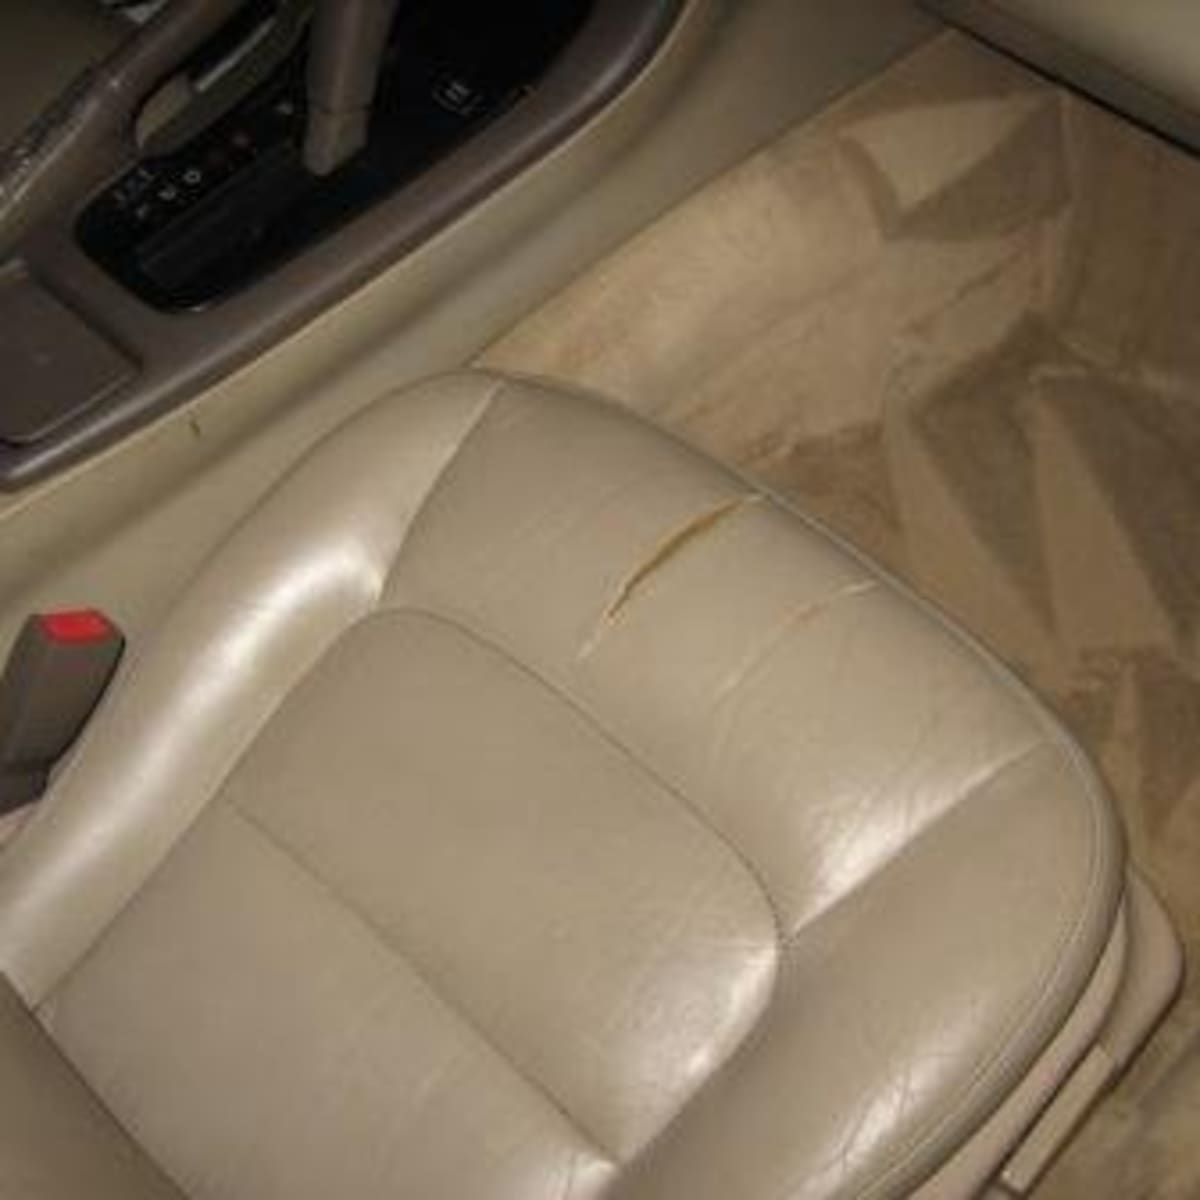 Repair Leather And Vinyl Car Seats, How Much Does It Cost To Repair Car Seats